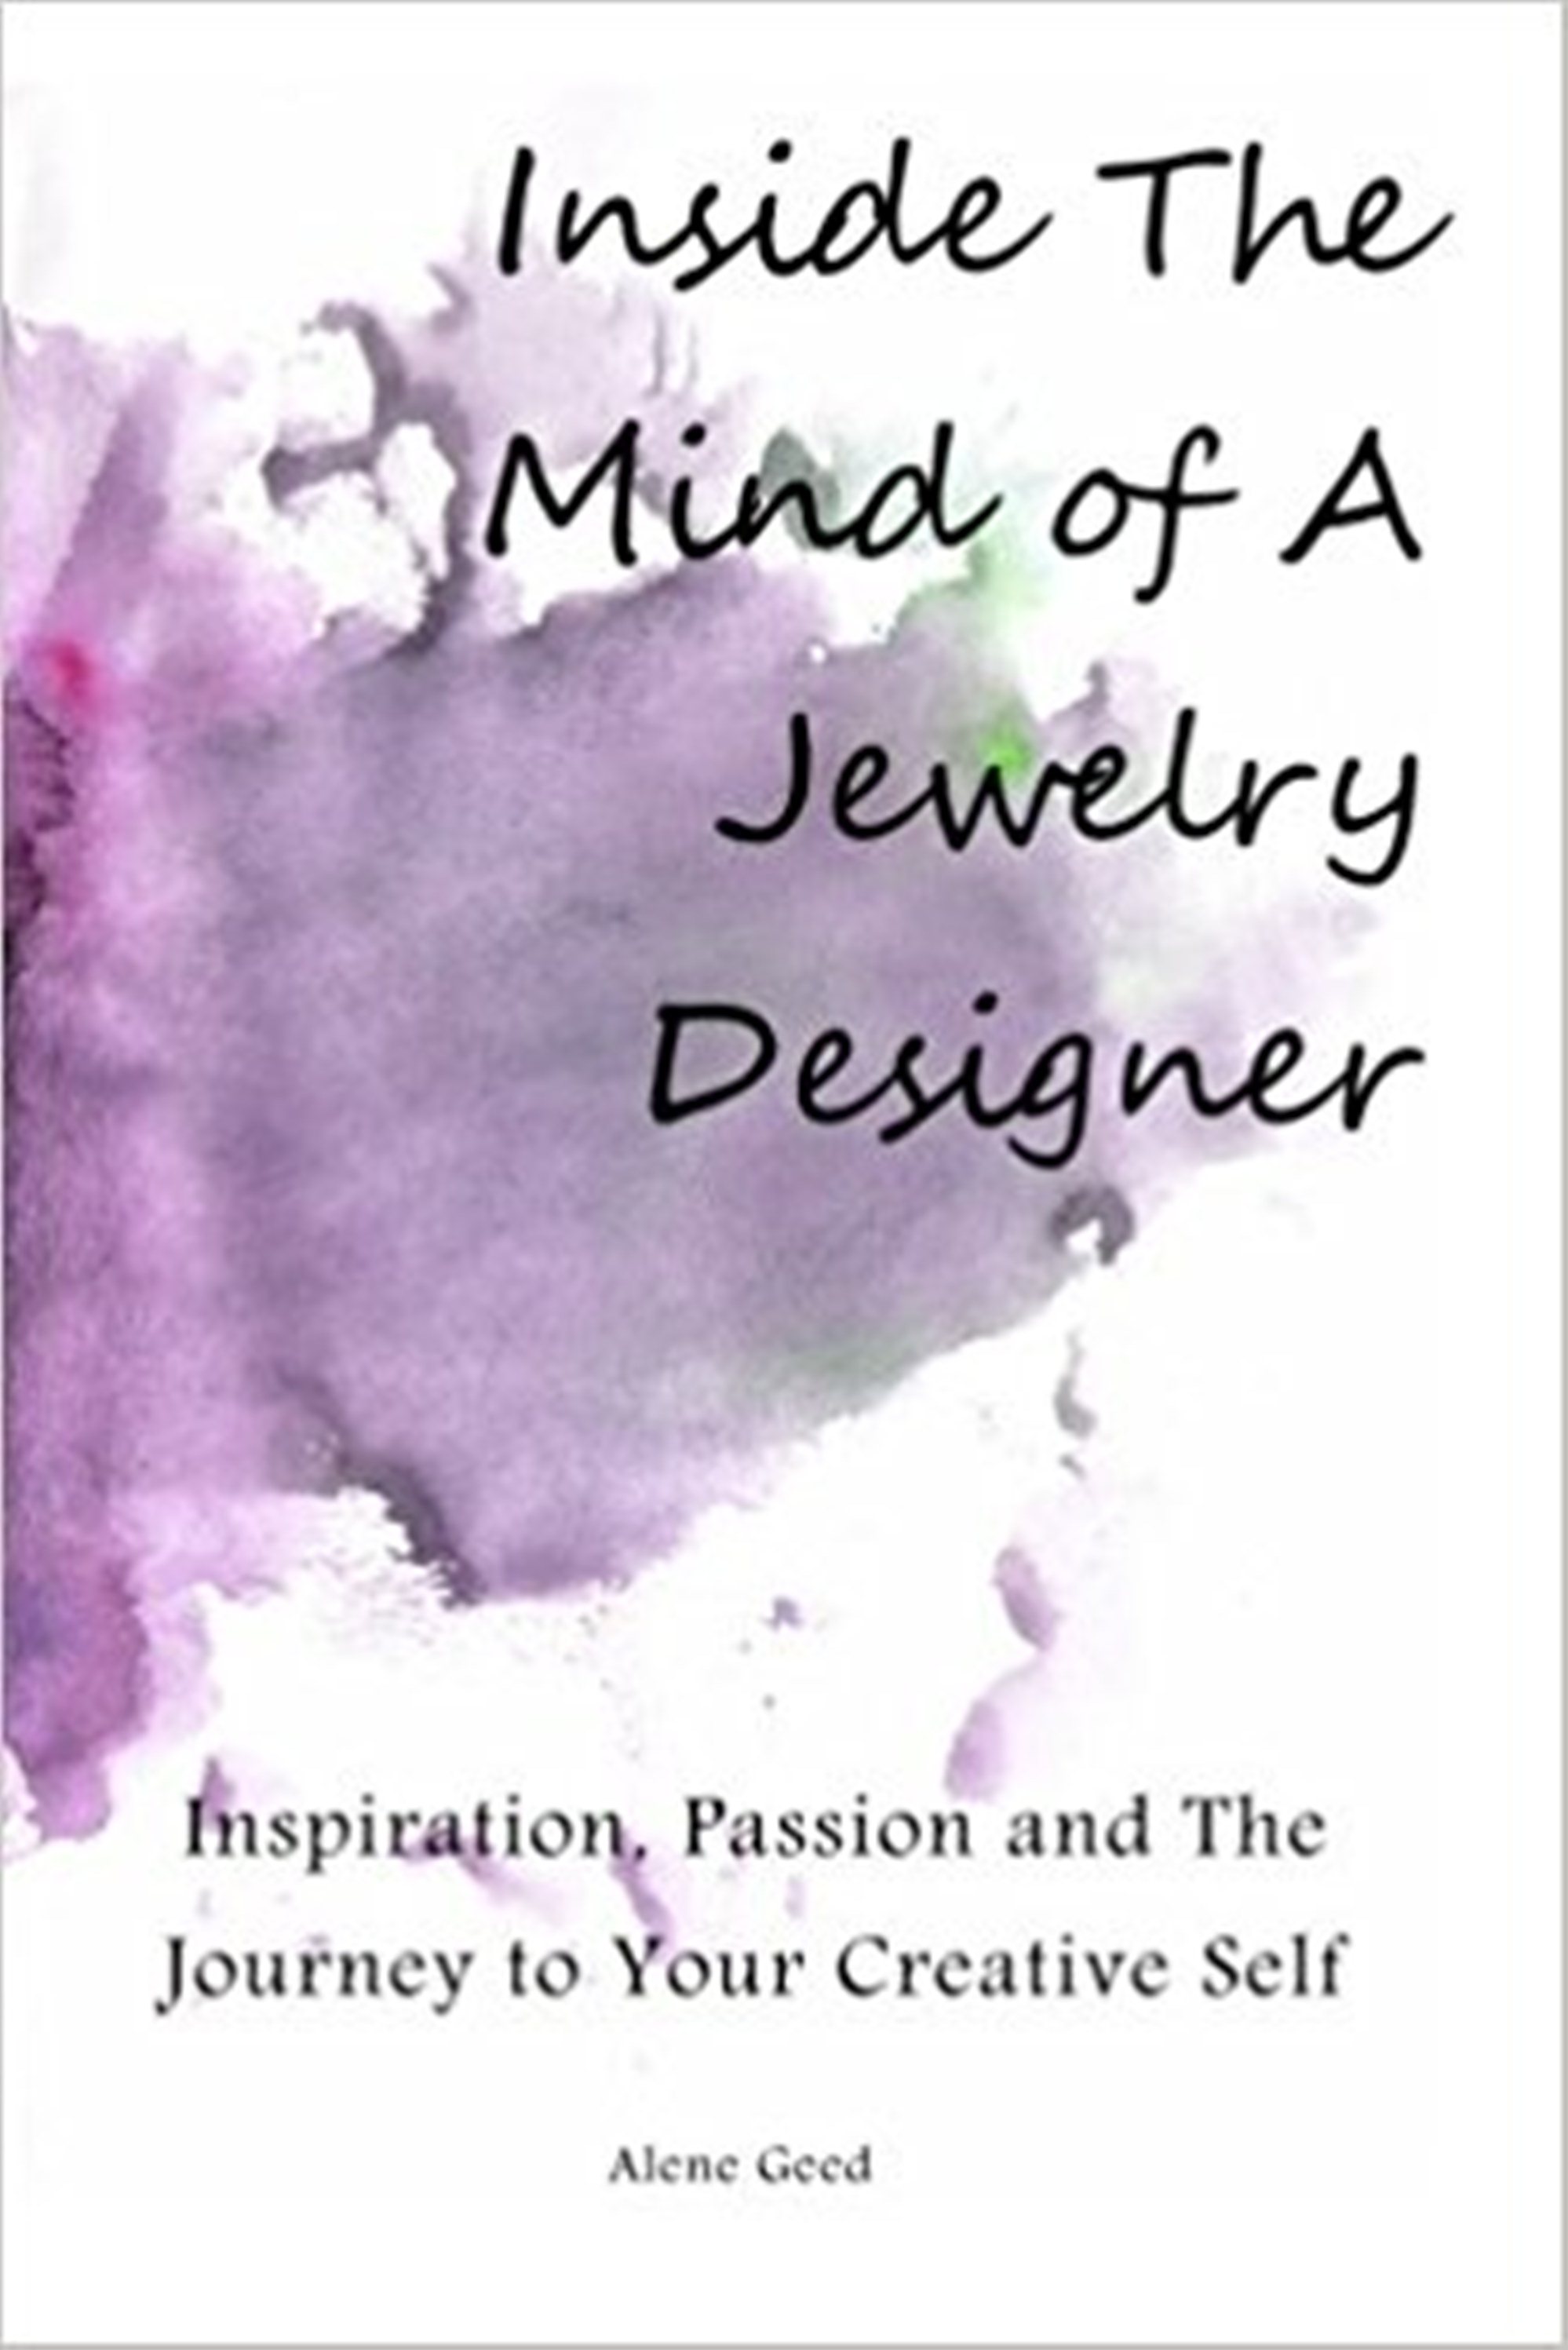 FREE: Inside The Mind of A Jewelry Designer by Alene Geed